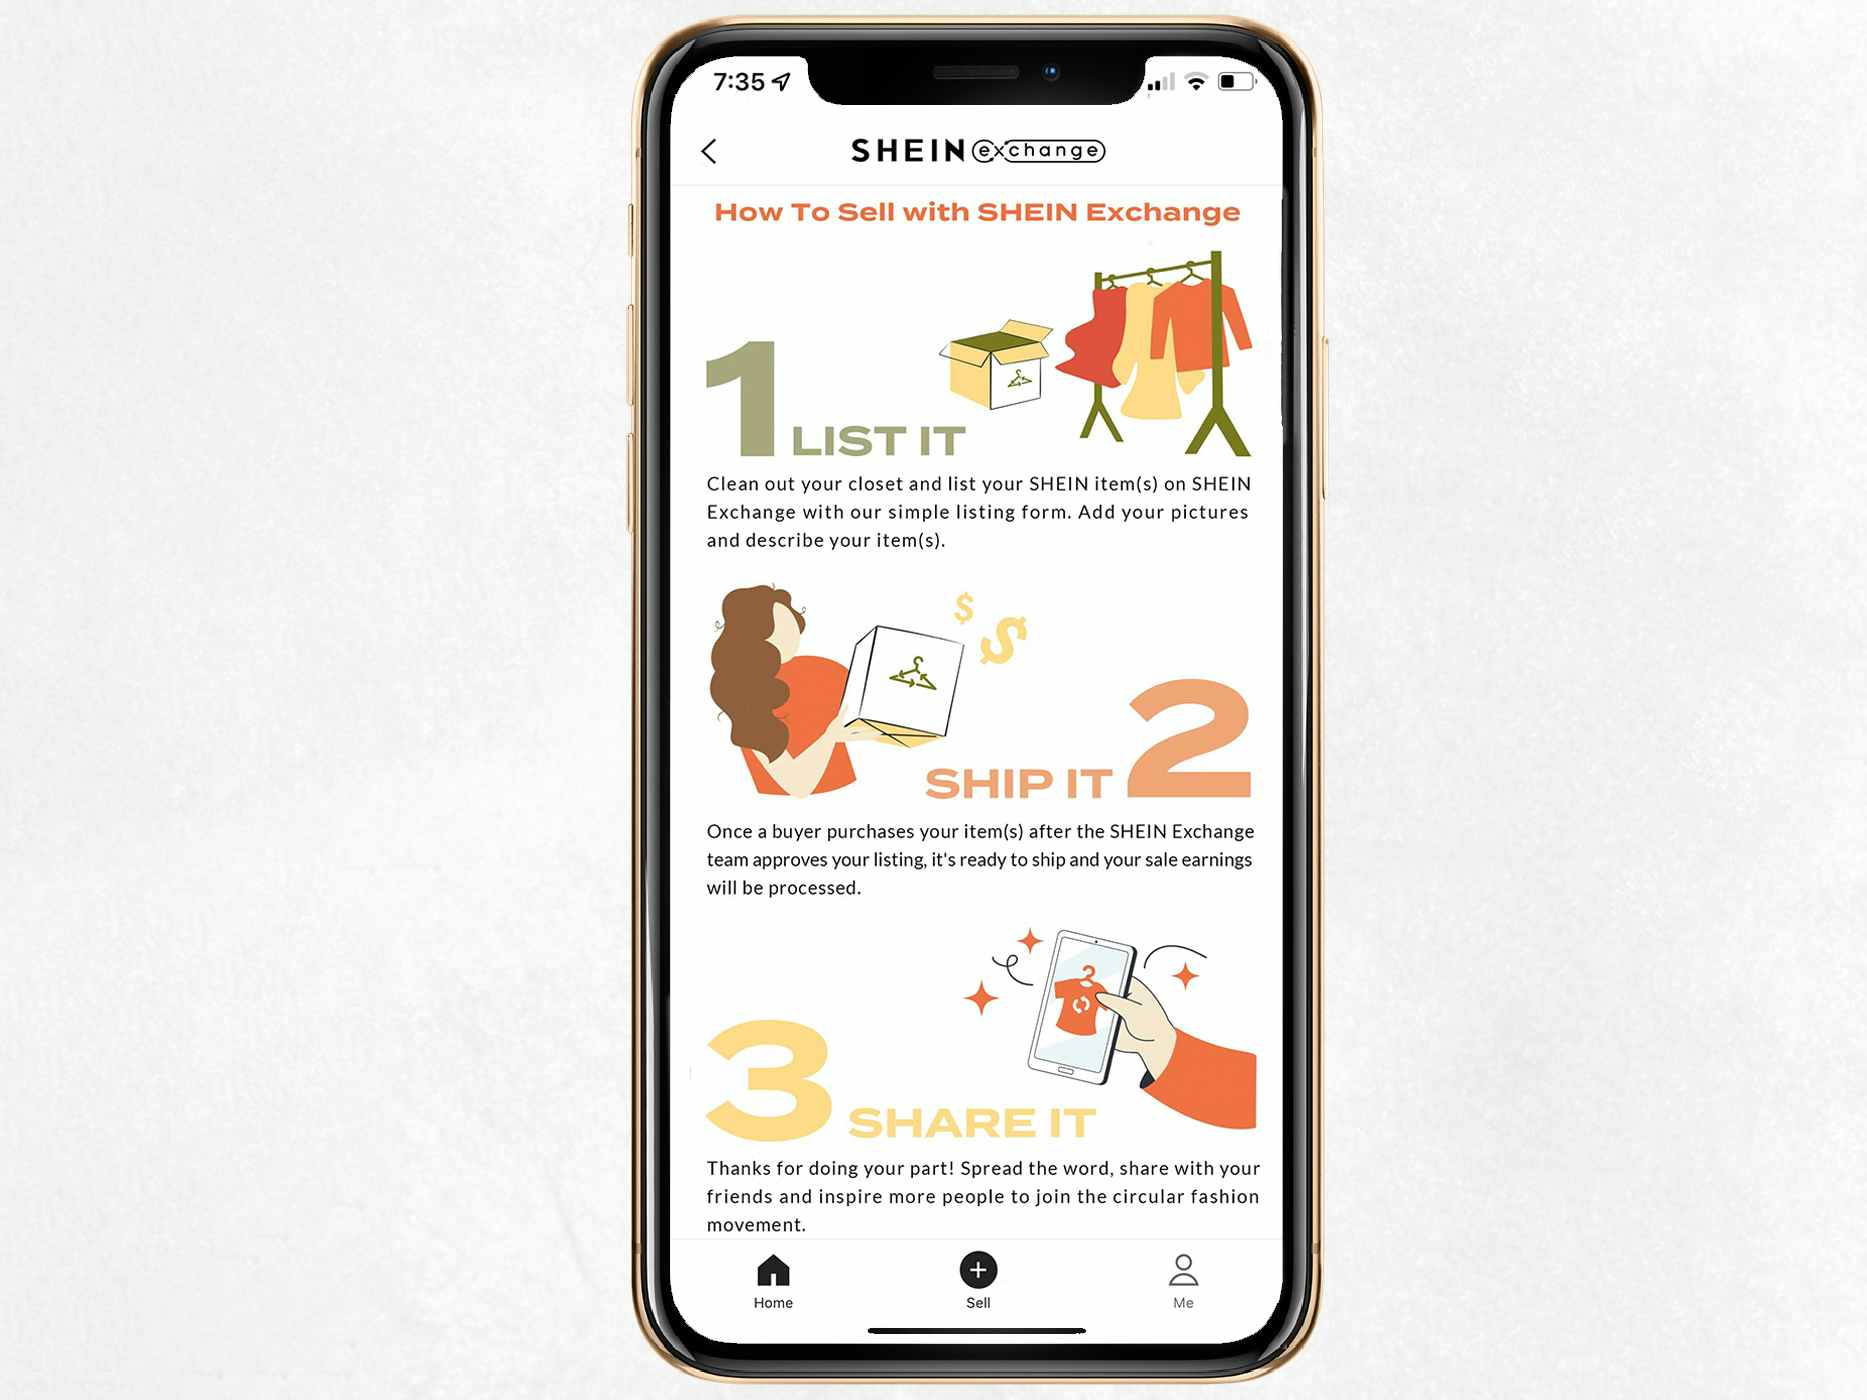 Shein Infographic on cellphone, how to use their exchange program